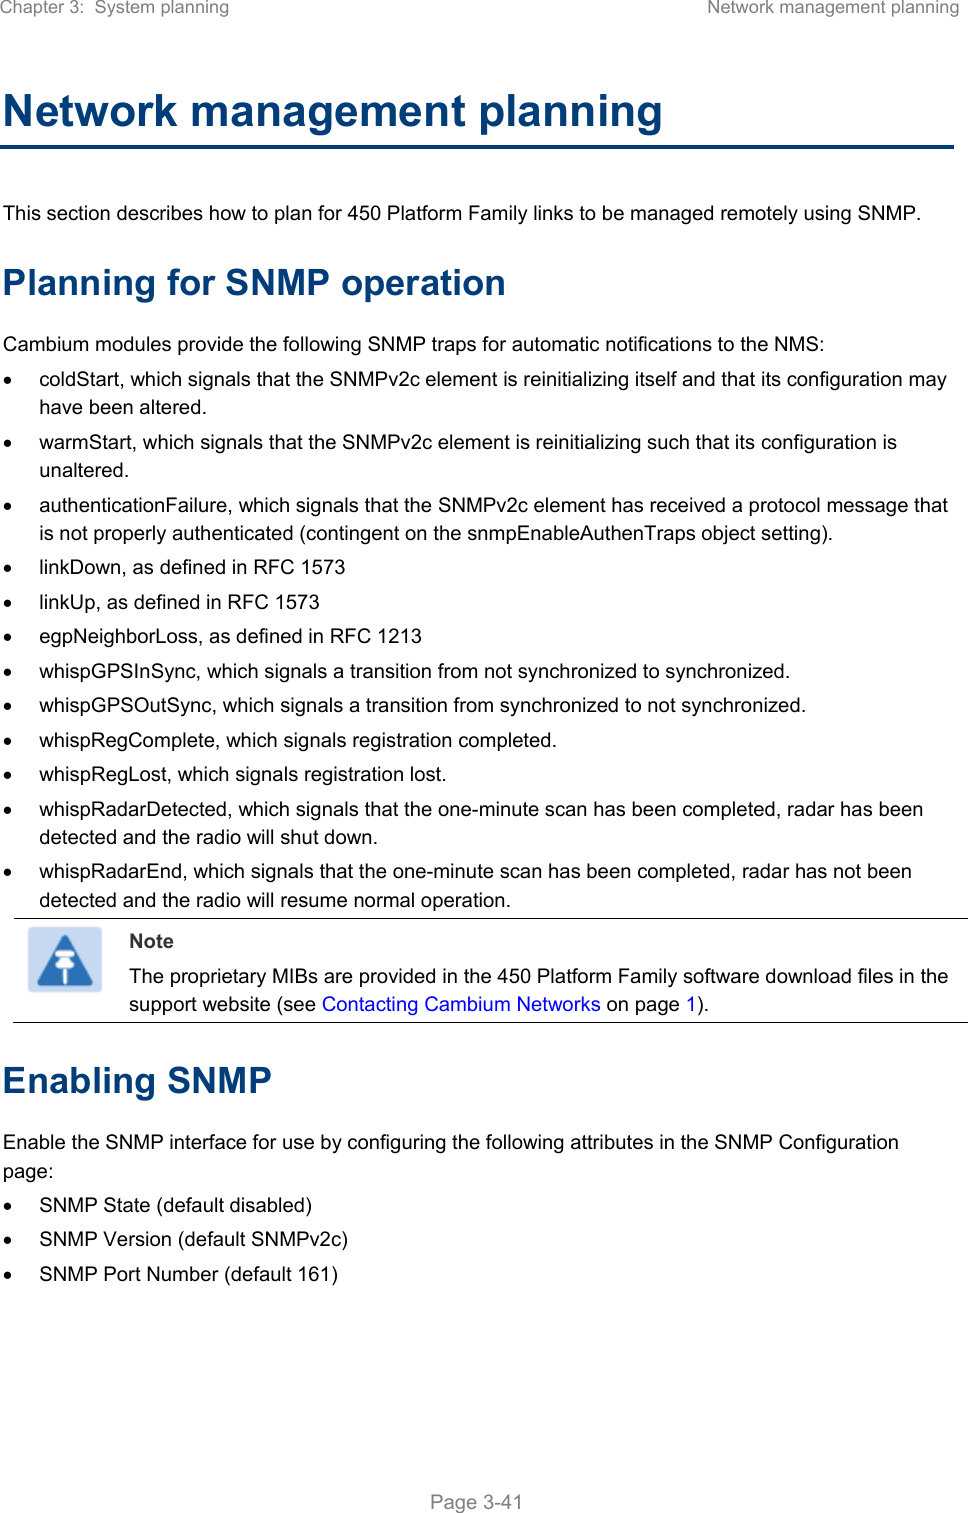 Chapter 3:  System planning  Network management planning   Page 3-41 Network management planning This section describes how to plan for 450 Platform Family links to be managed remotely using SNMP. Planning for SNMP operation Cambium modules provide the following SNMP traps for automatic notifications to the NMS:   coldStart, which signals that the SNMPv2c element is reinitializing itself and that its configuration may have been altered.   warmStart, which signals that the SNMPv2c element is reinitializing such that its configuration is unaltered.   authenticationFailure, which signals that the SNMPv2c element has received a protocol message that is not properly authenticated (contingent on the snmpEnableAuthenTraps object setting).   linkDown, as defined in RFC 1573   linkUp, as defined in RFC 1573   egpNeighborLoss, as defined in RFC 1213   whispGPSInSync, which signals a transition from not synchronized to synchronized.   whispGPSOutSync, which signals a transition from synchronized to not synchronized.   whispRegComplete, which signals registration completed.    whispRegLost, which signals registration lost.    whispRadarDetected, which signals that the one-minute scan has been completed, radar has been detected and the radio will shut down.    whispRadarEnd, which signals that the one-minute scan has been completed, radar has not been detected and the radio will resume normal operation.   Note The proprietary MIBs are provided in the 450 Platform Family software download files in the support website (see Contacting Cambium Networks on page 1). Enabling SNMP Enable the SNMP interface for use by configuring the following attributes in the SNMP Configuration page:   SNMP State (default disabled)   SNMP Version (default SNMPv2c)   SNMP Port Number (default 161) 